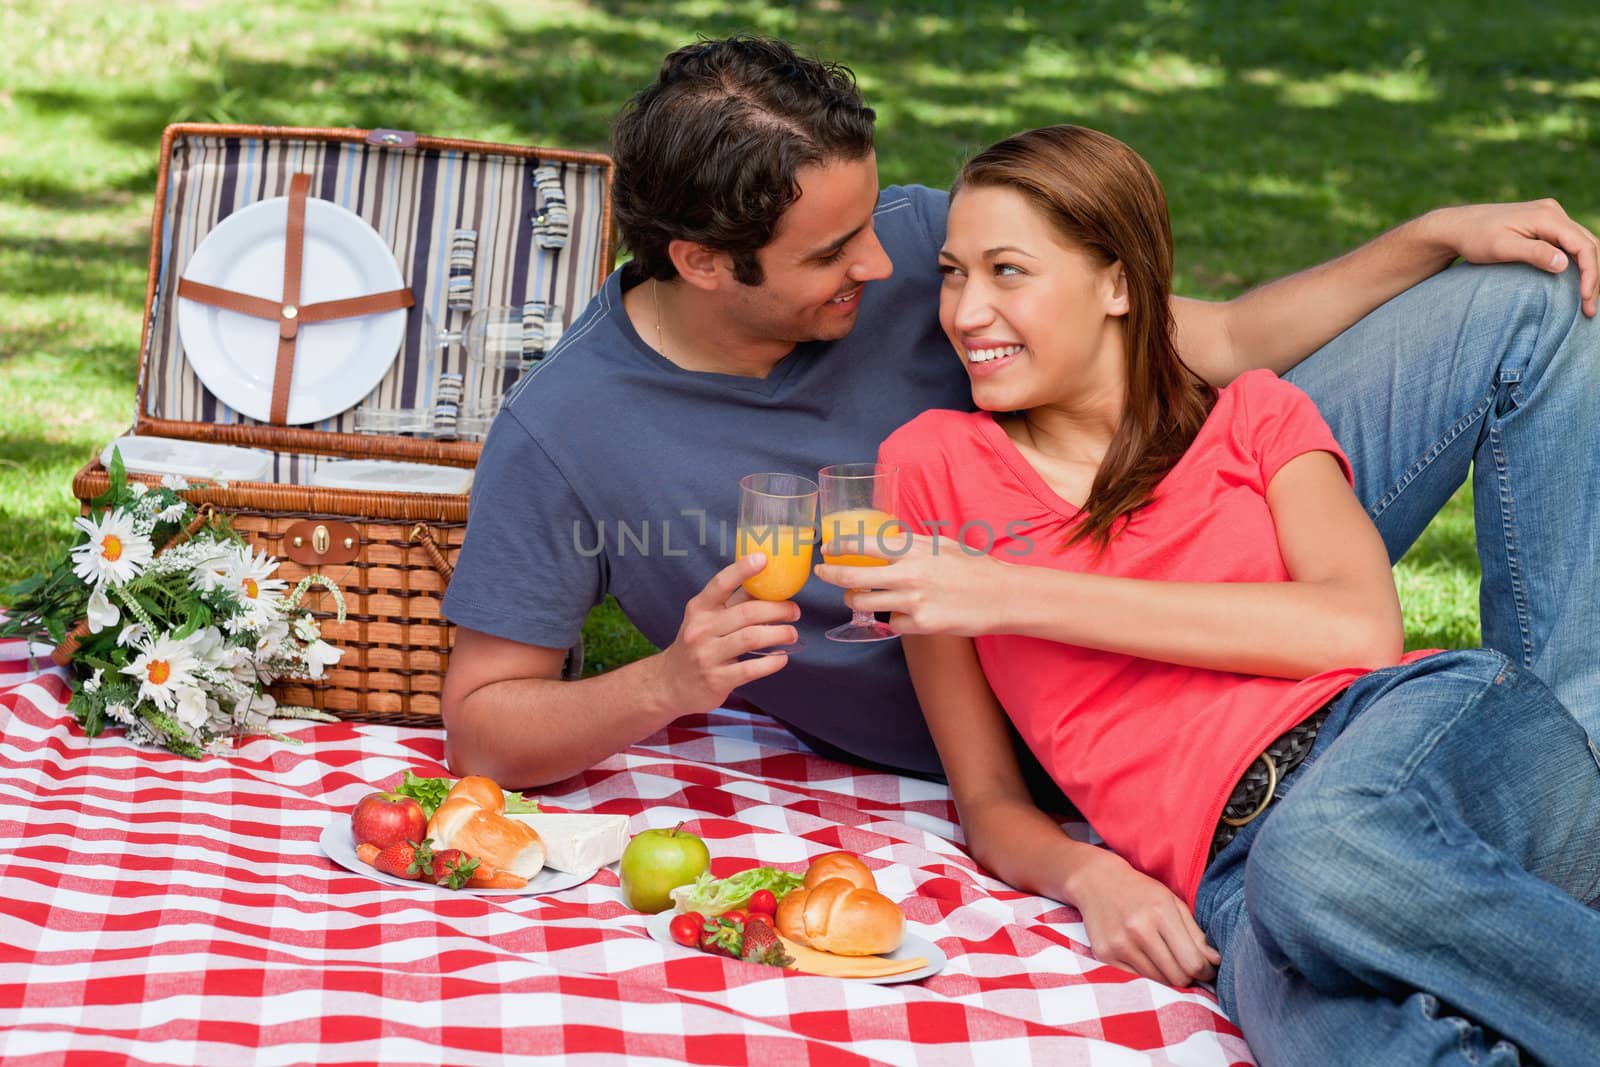 Two friends touching glasses while looking at each other as they lie together on a blanket with picnic food